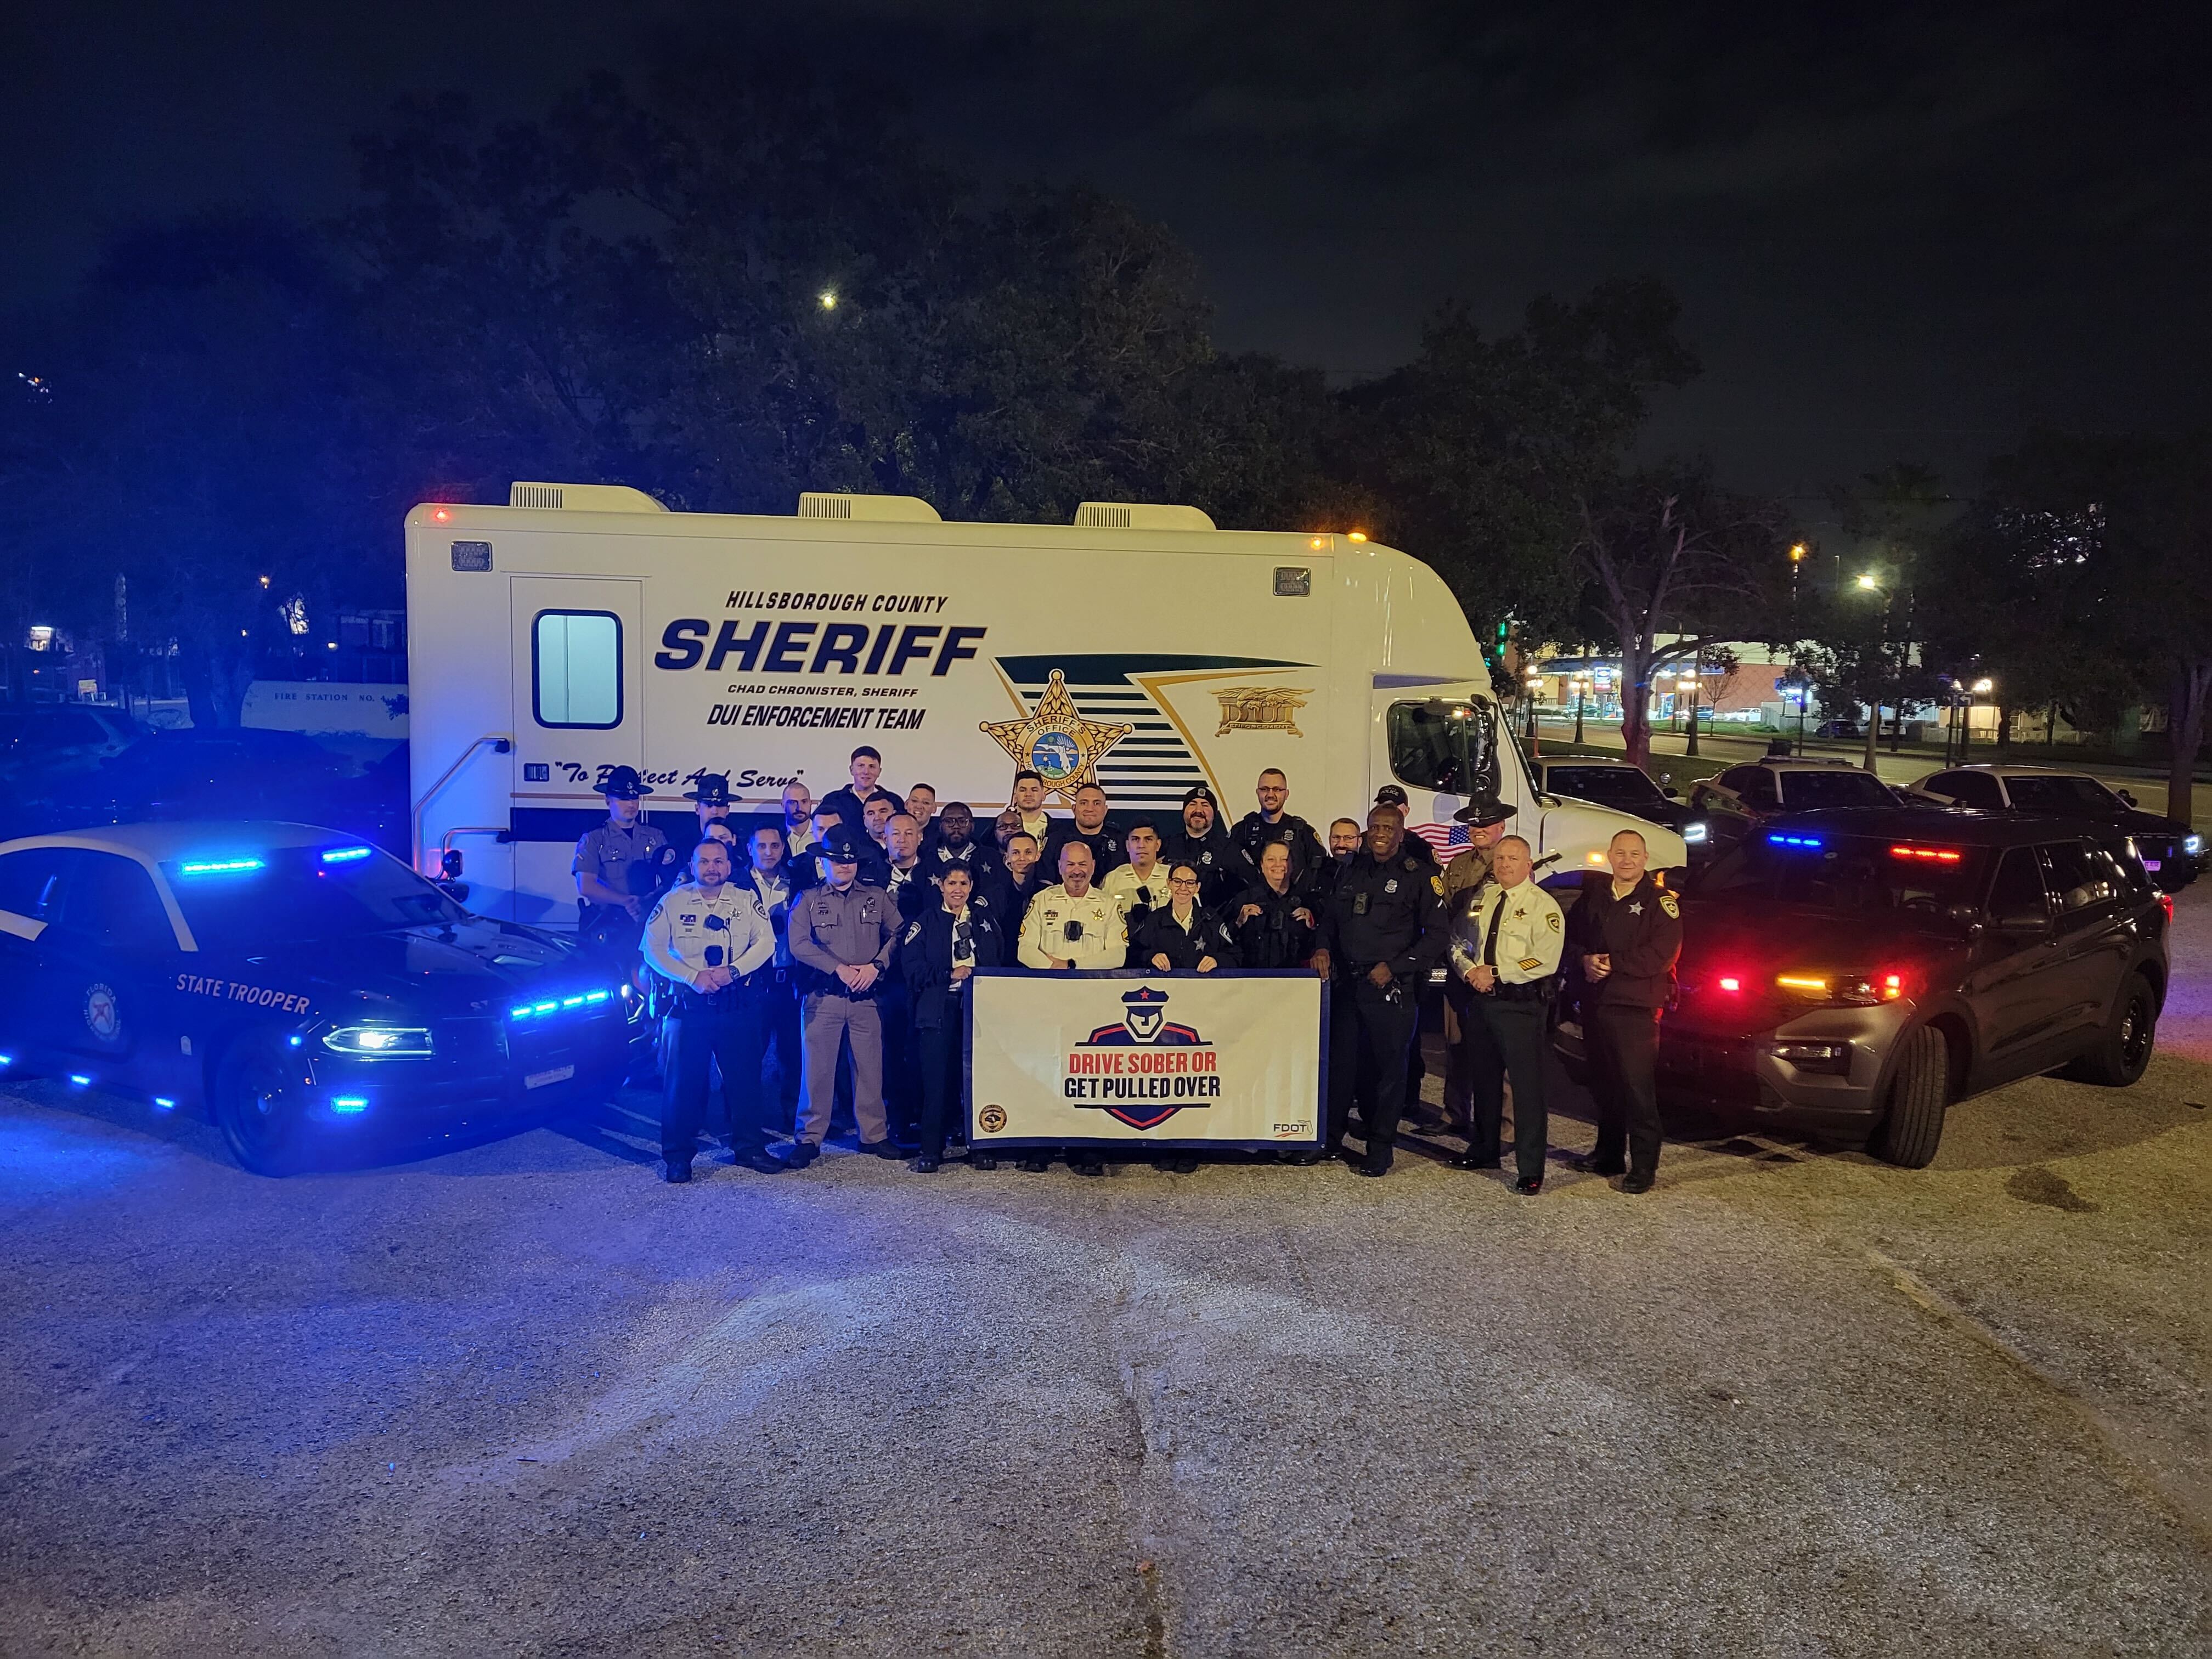 25 ARRESTED IN NEW YEAR'S EVE DUI OPERATION